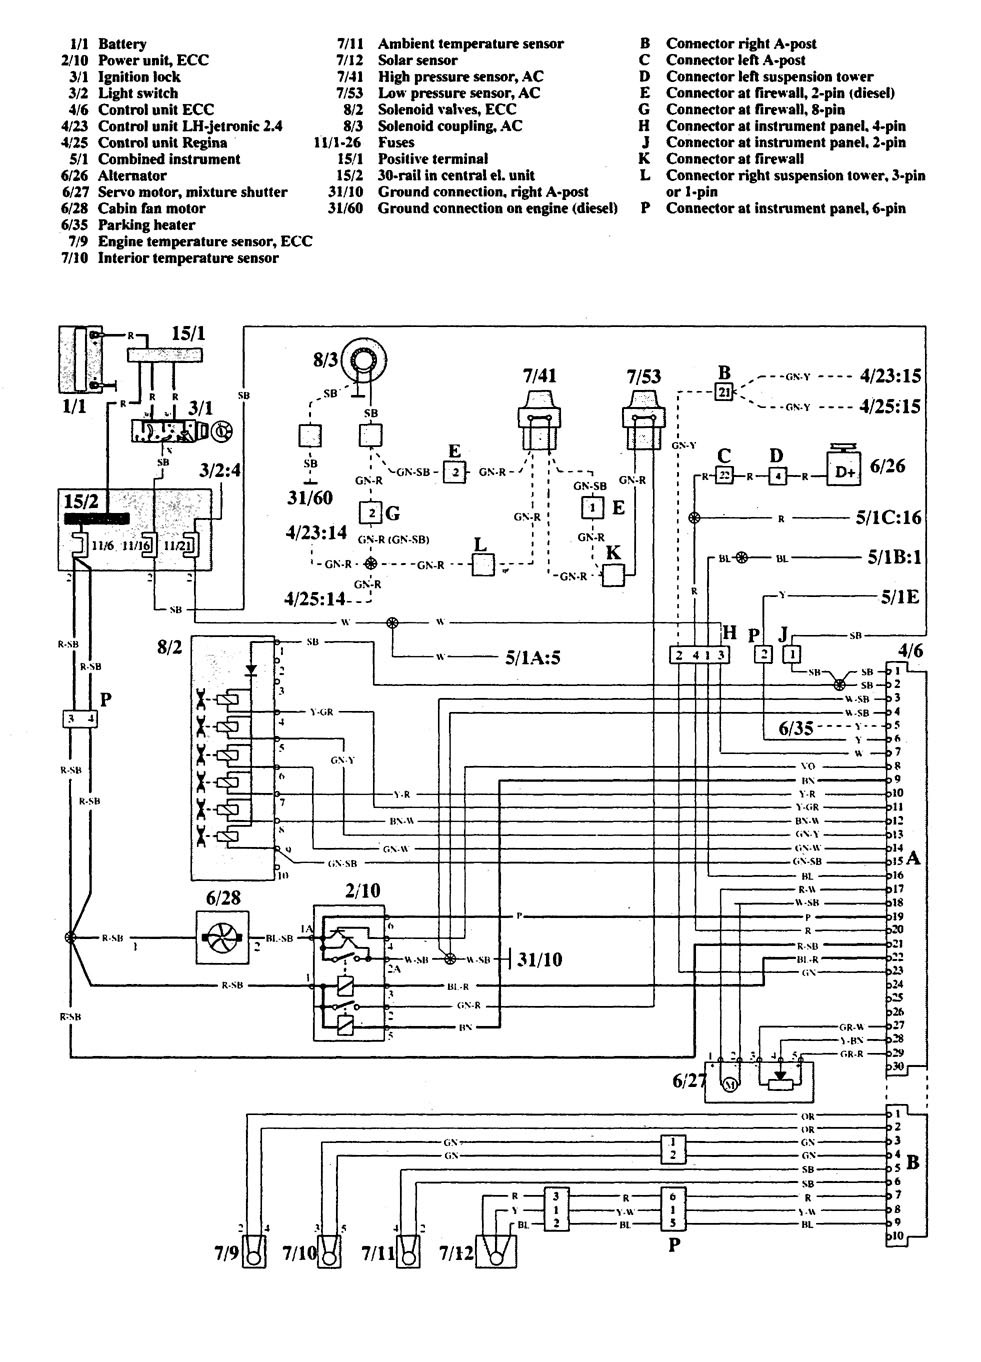 Volvo 940 (1992) - wiring diagrams - HVAC controls - Carknowledge.info